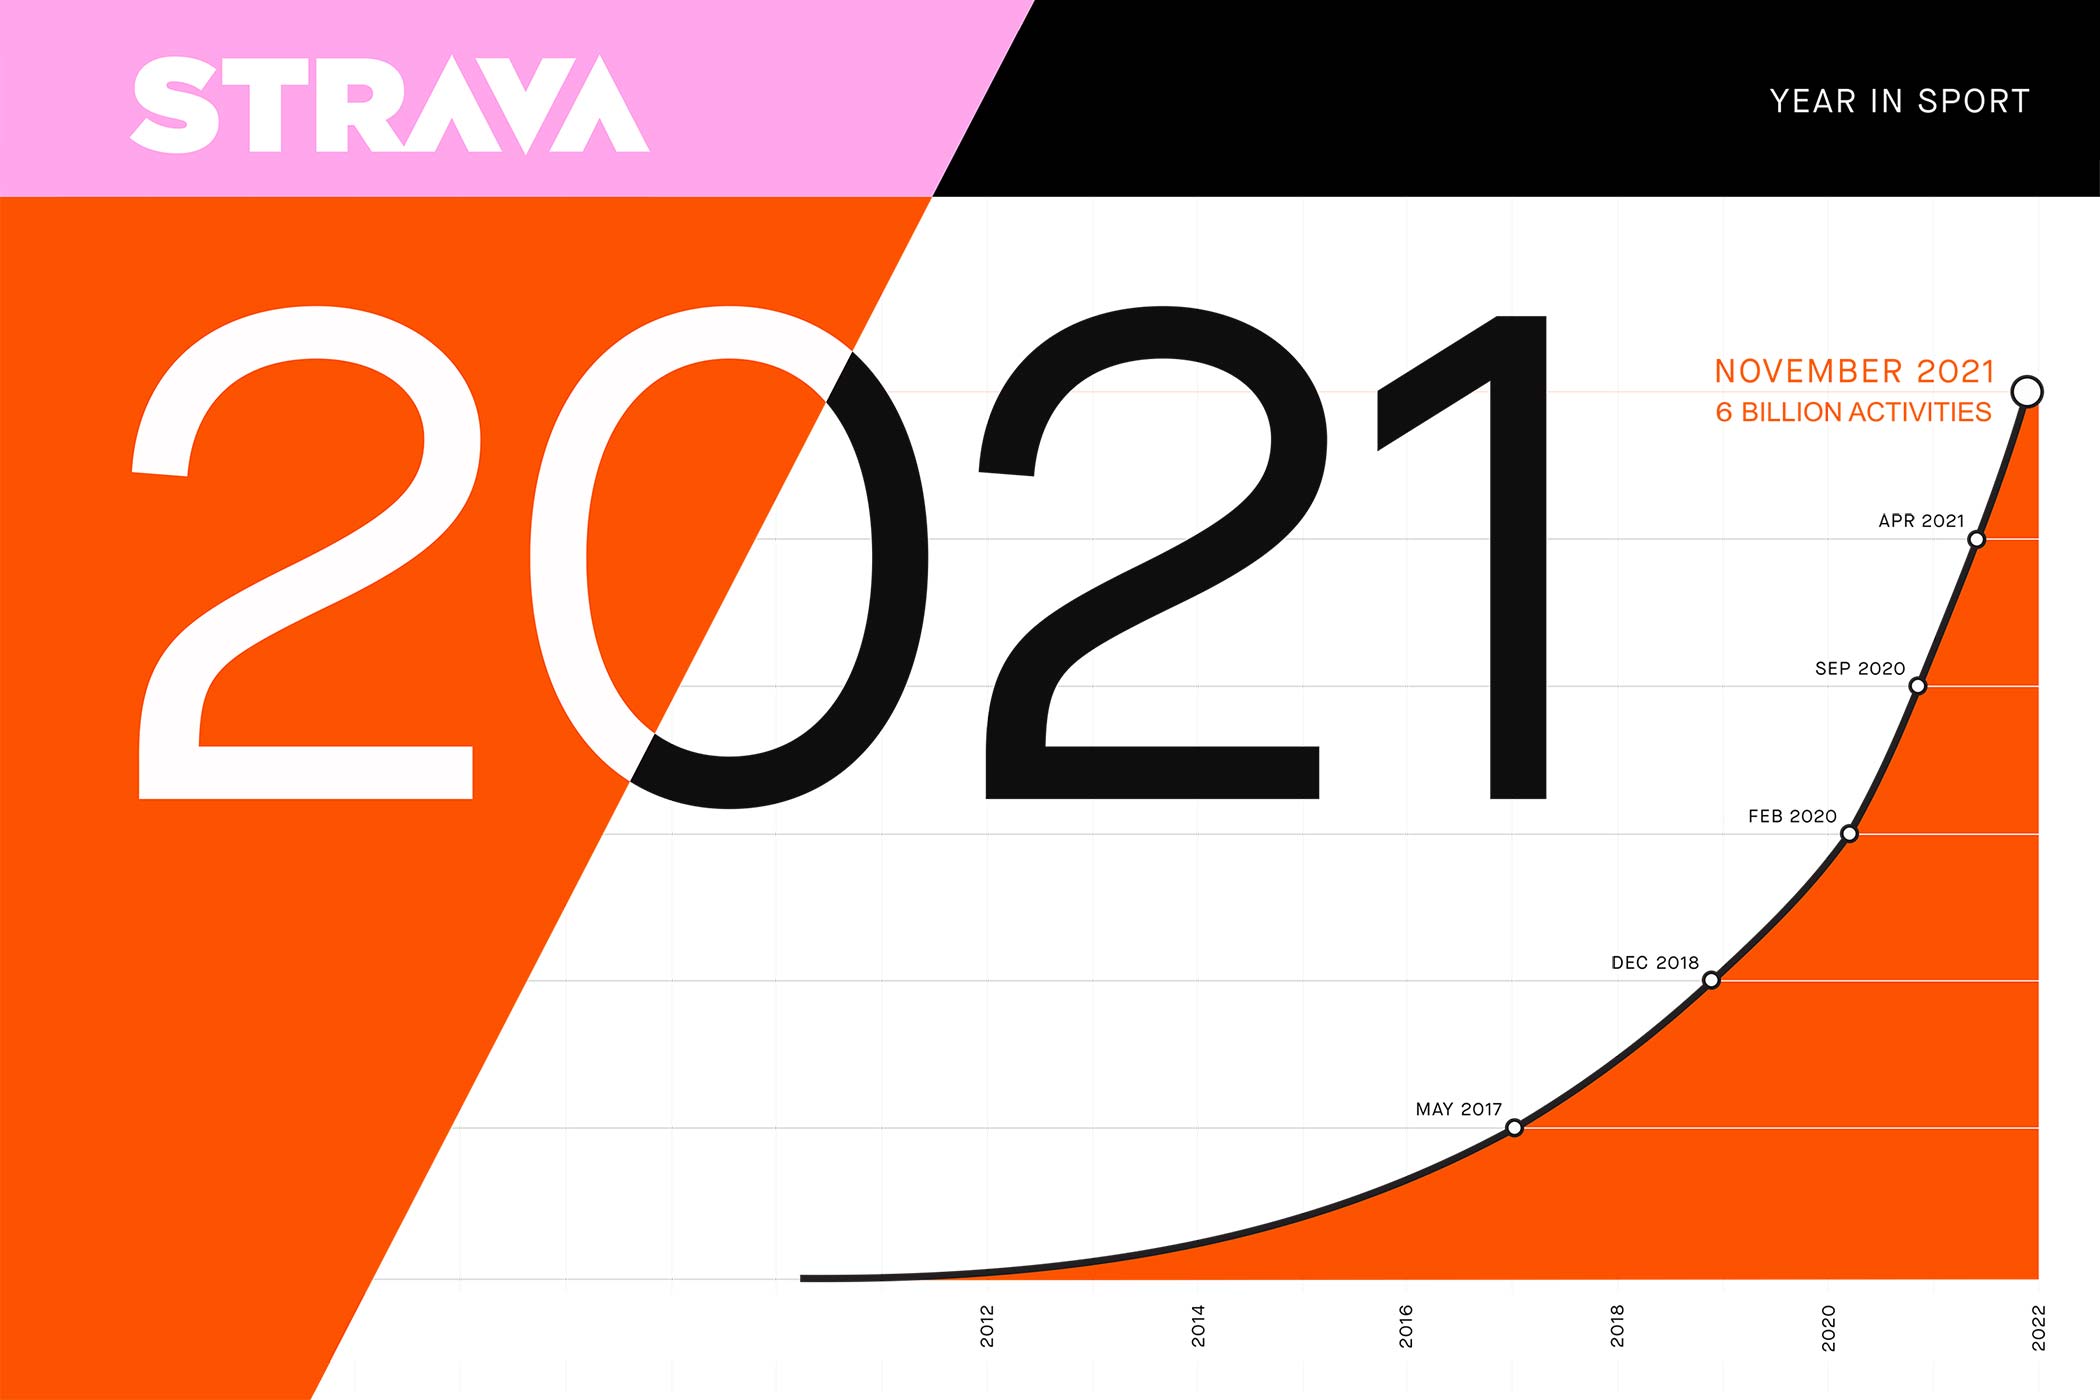 Strava 2021 Year In Sport hits record numbers, 6 billion activities uploaded